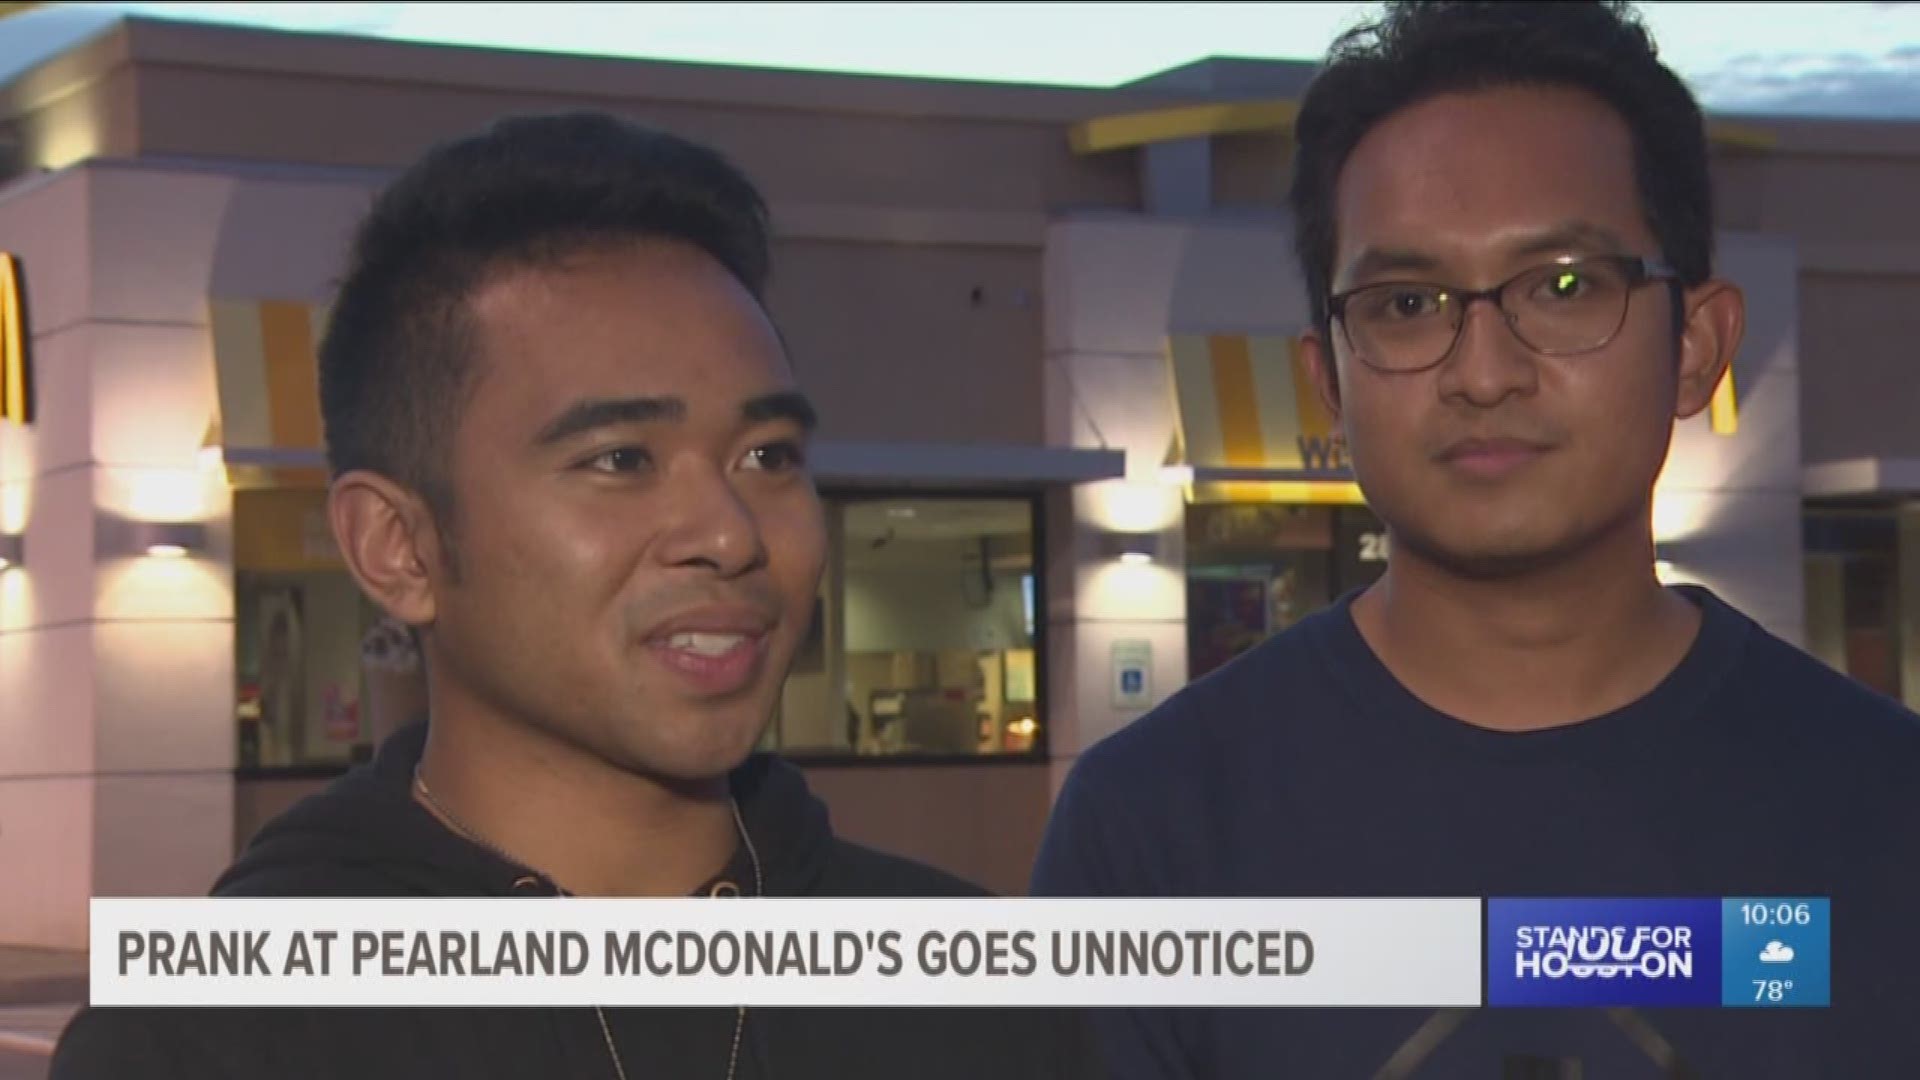 A couple of friends in Pearland are going viral for a prank they pulled at a McDonald's. They did it more than a month ago and can't believe the fast food giant hasn't noticed yet.